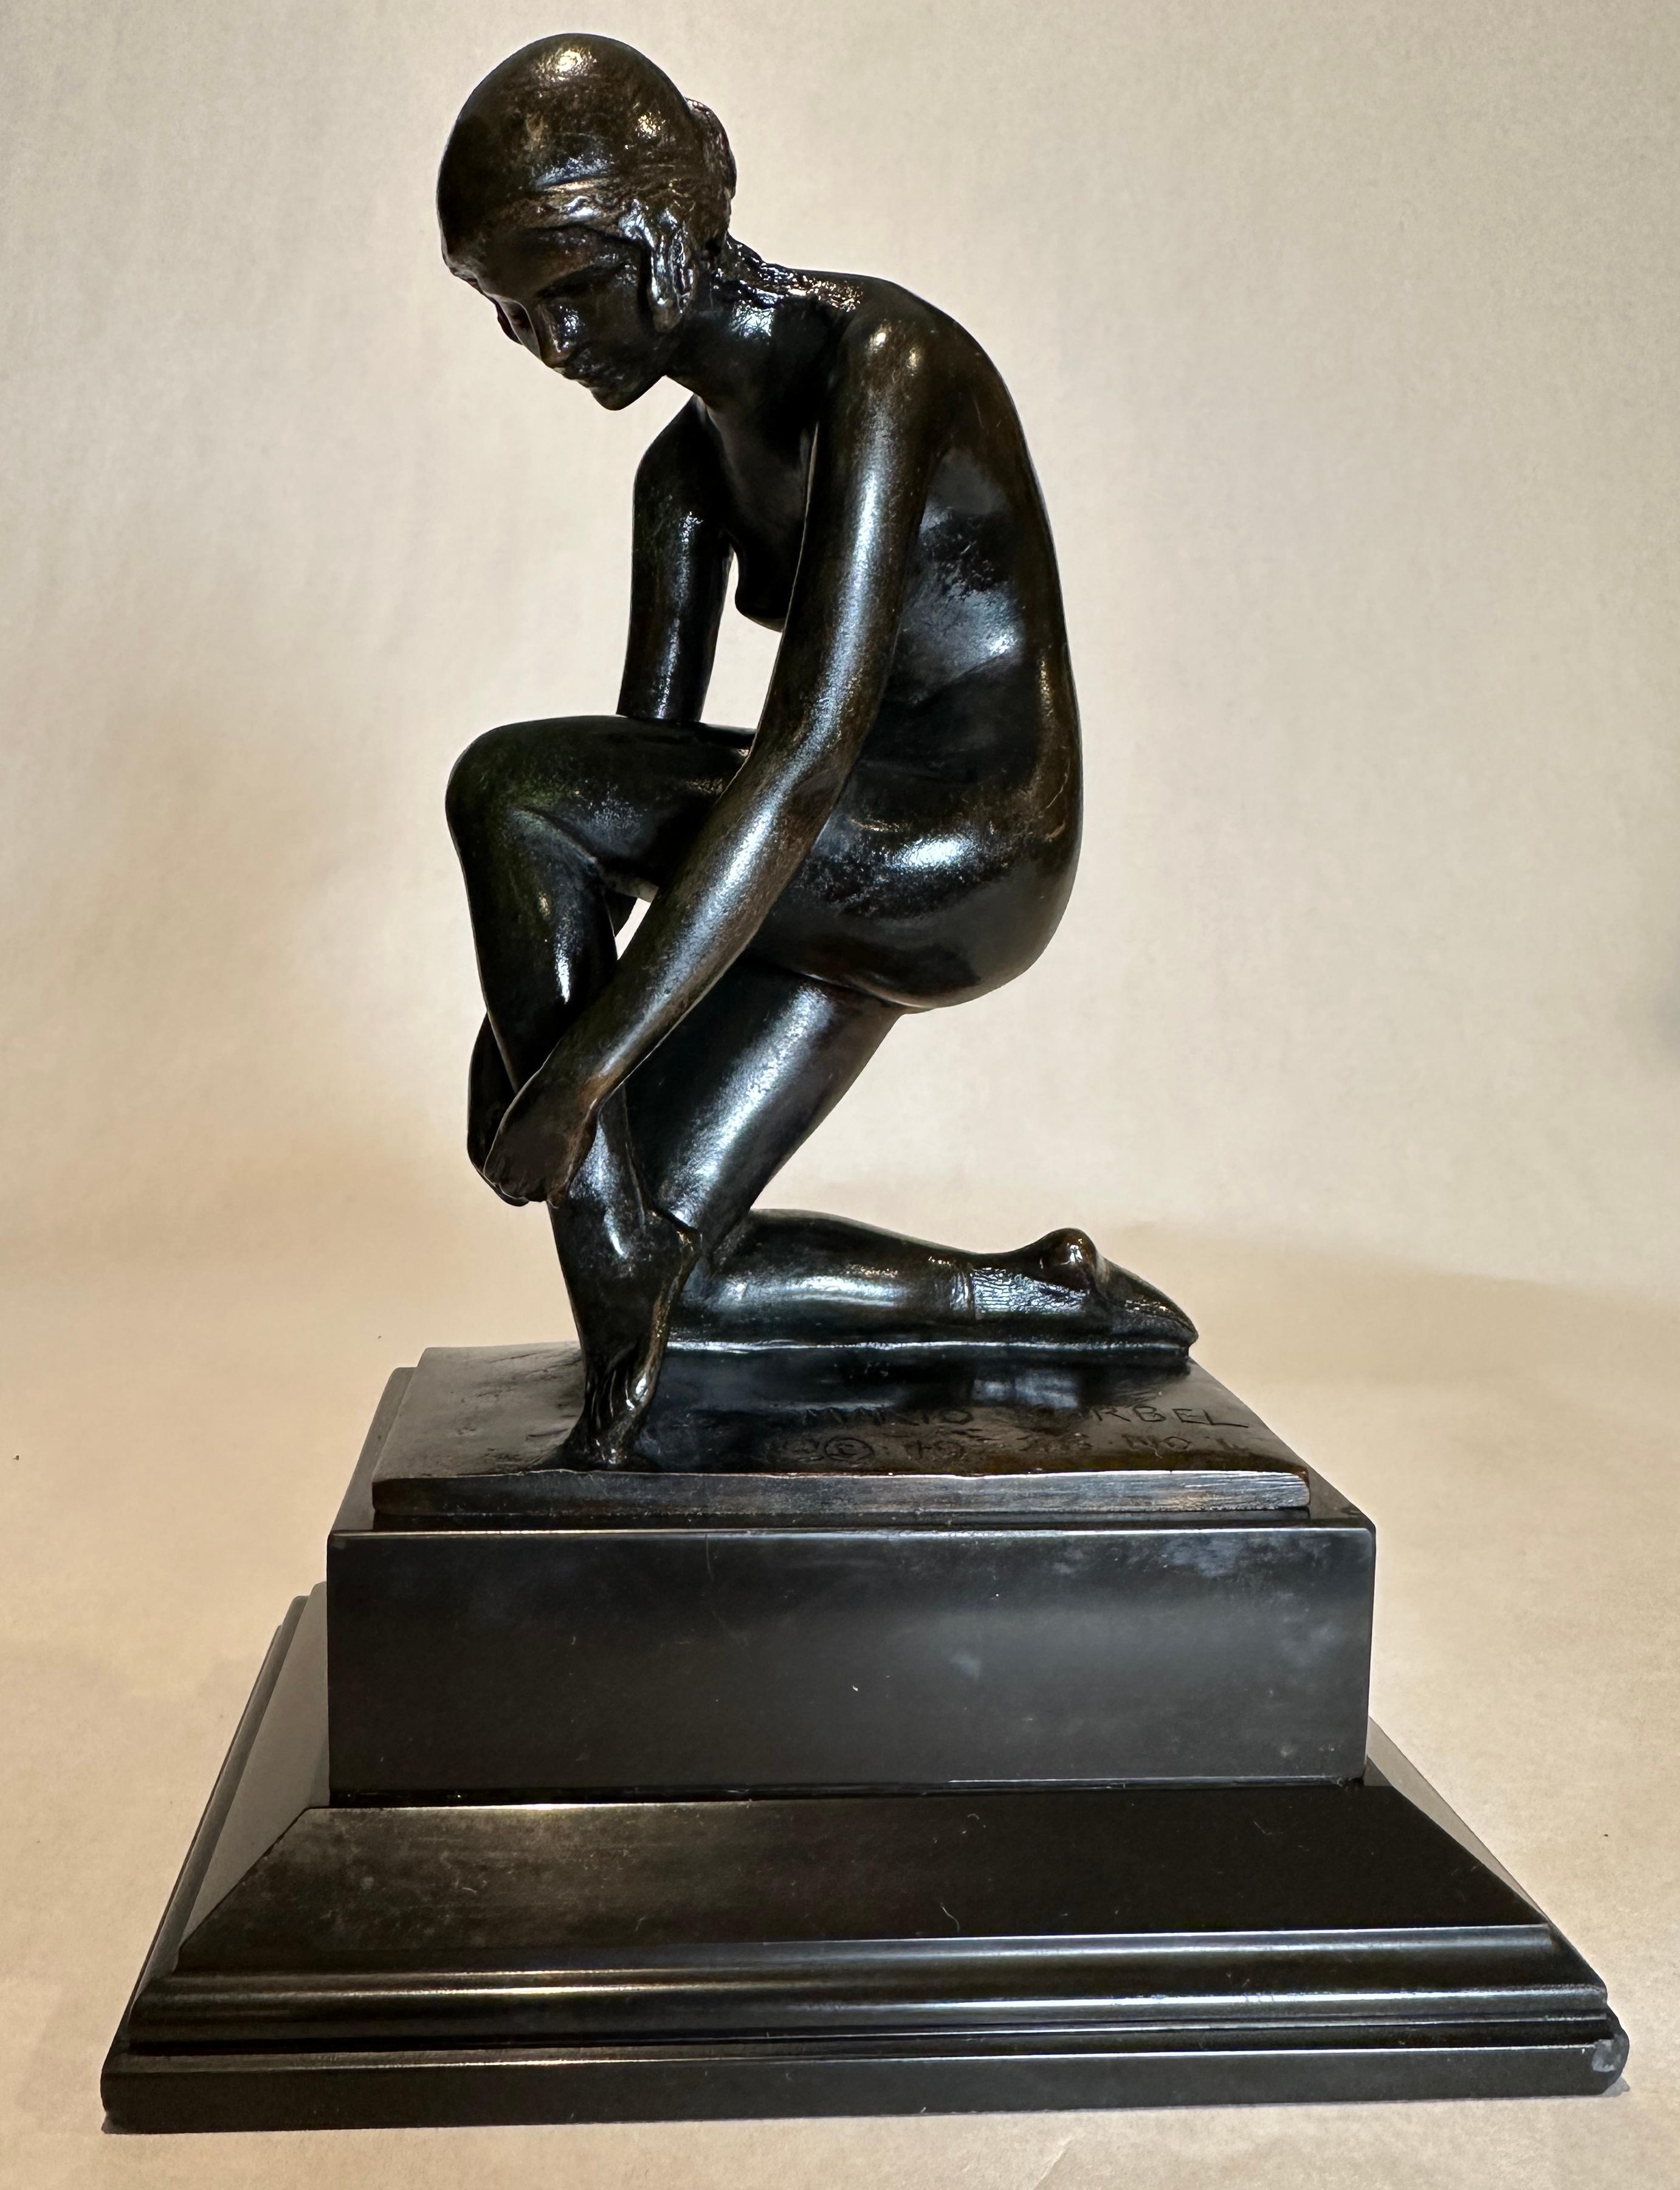 Joseph Mario Korbel (Czech/American, 1882-1954). Period fine example bronze, dark brown patina, modeled as a nude female kneeling and tying her sandal, raised on a stepped black marble base, signed Mario Korbel/ 1926 No. 4, and stamped 'Roman Bronze